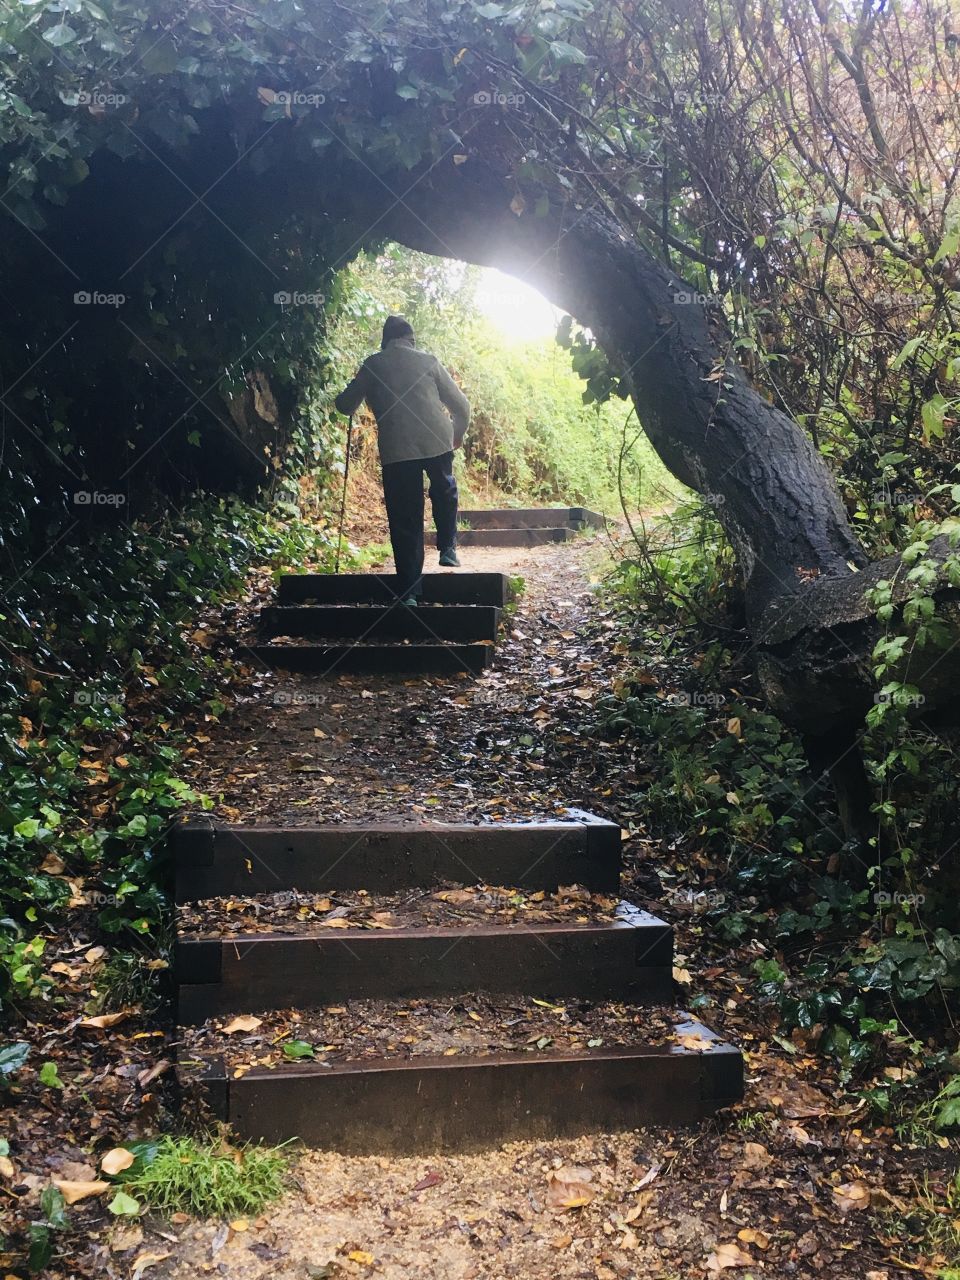 The intrepid elderly woman is shrouded among the shadows of trees as she slowly makes her way up the wooden steps in the dense forest and heads into the alluring light with all its mysteries.